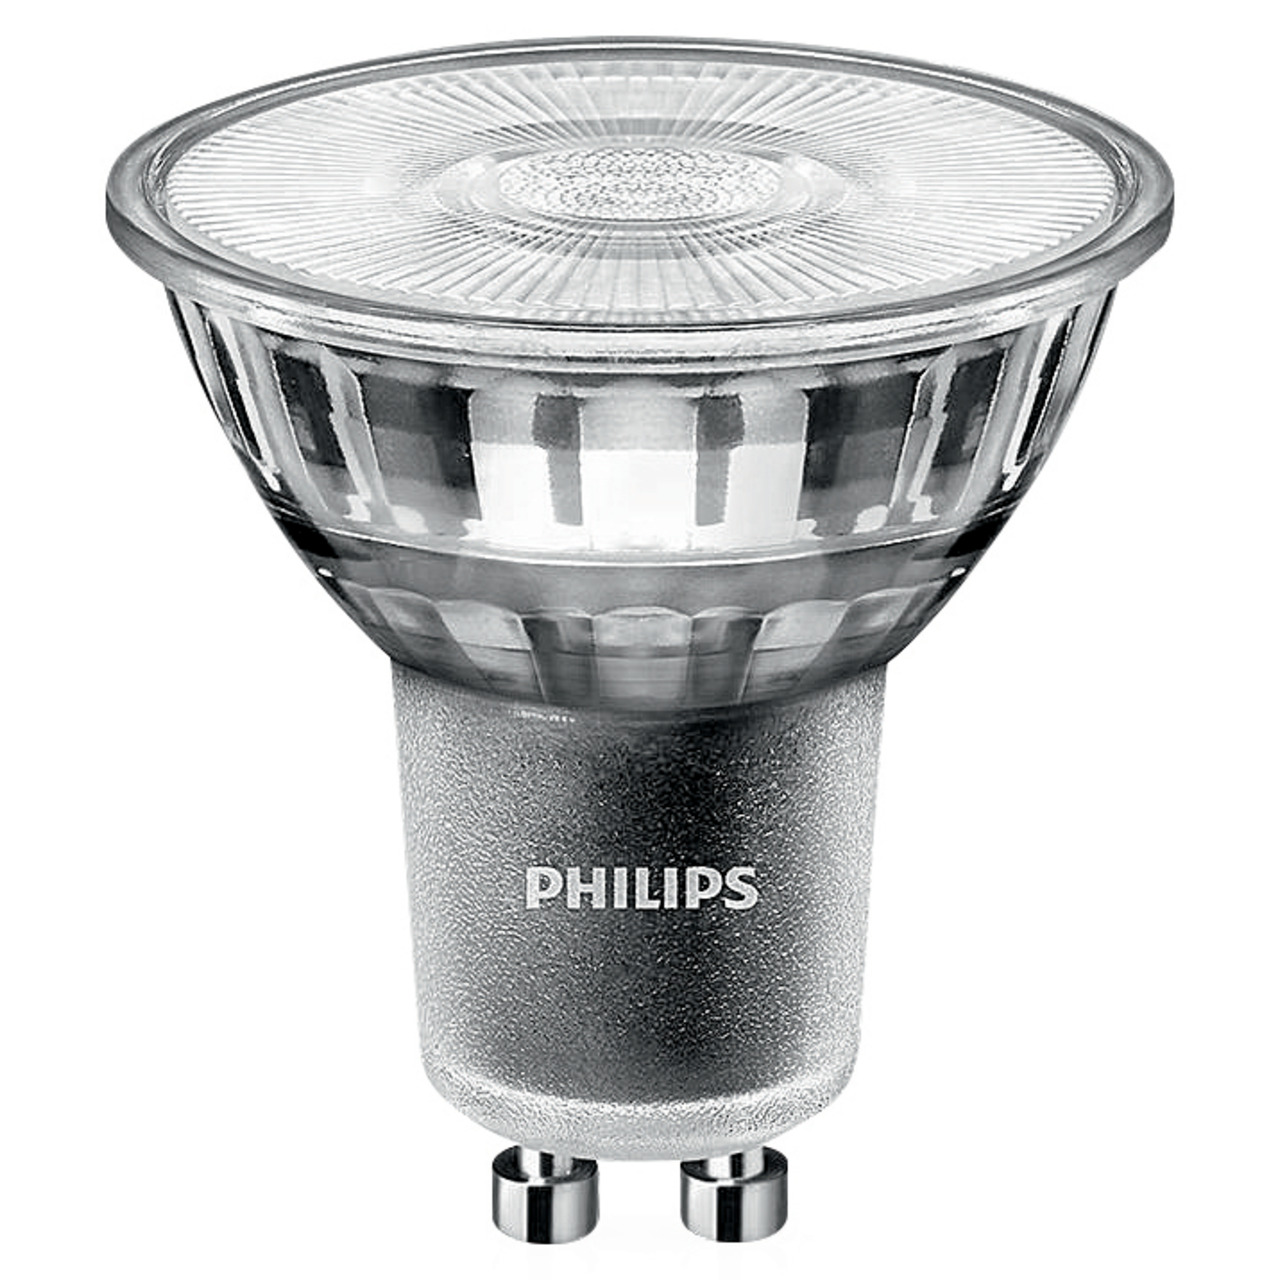 Philips MASTER ExpertColor 5-5-W-GU10-LED-Lampe- 355 lm- 97 Ra- 36 - 2700K- warmweiss- dimmbar